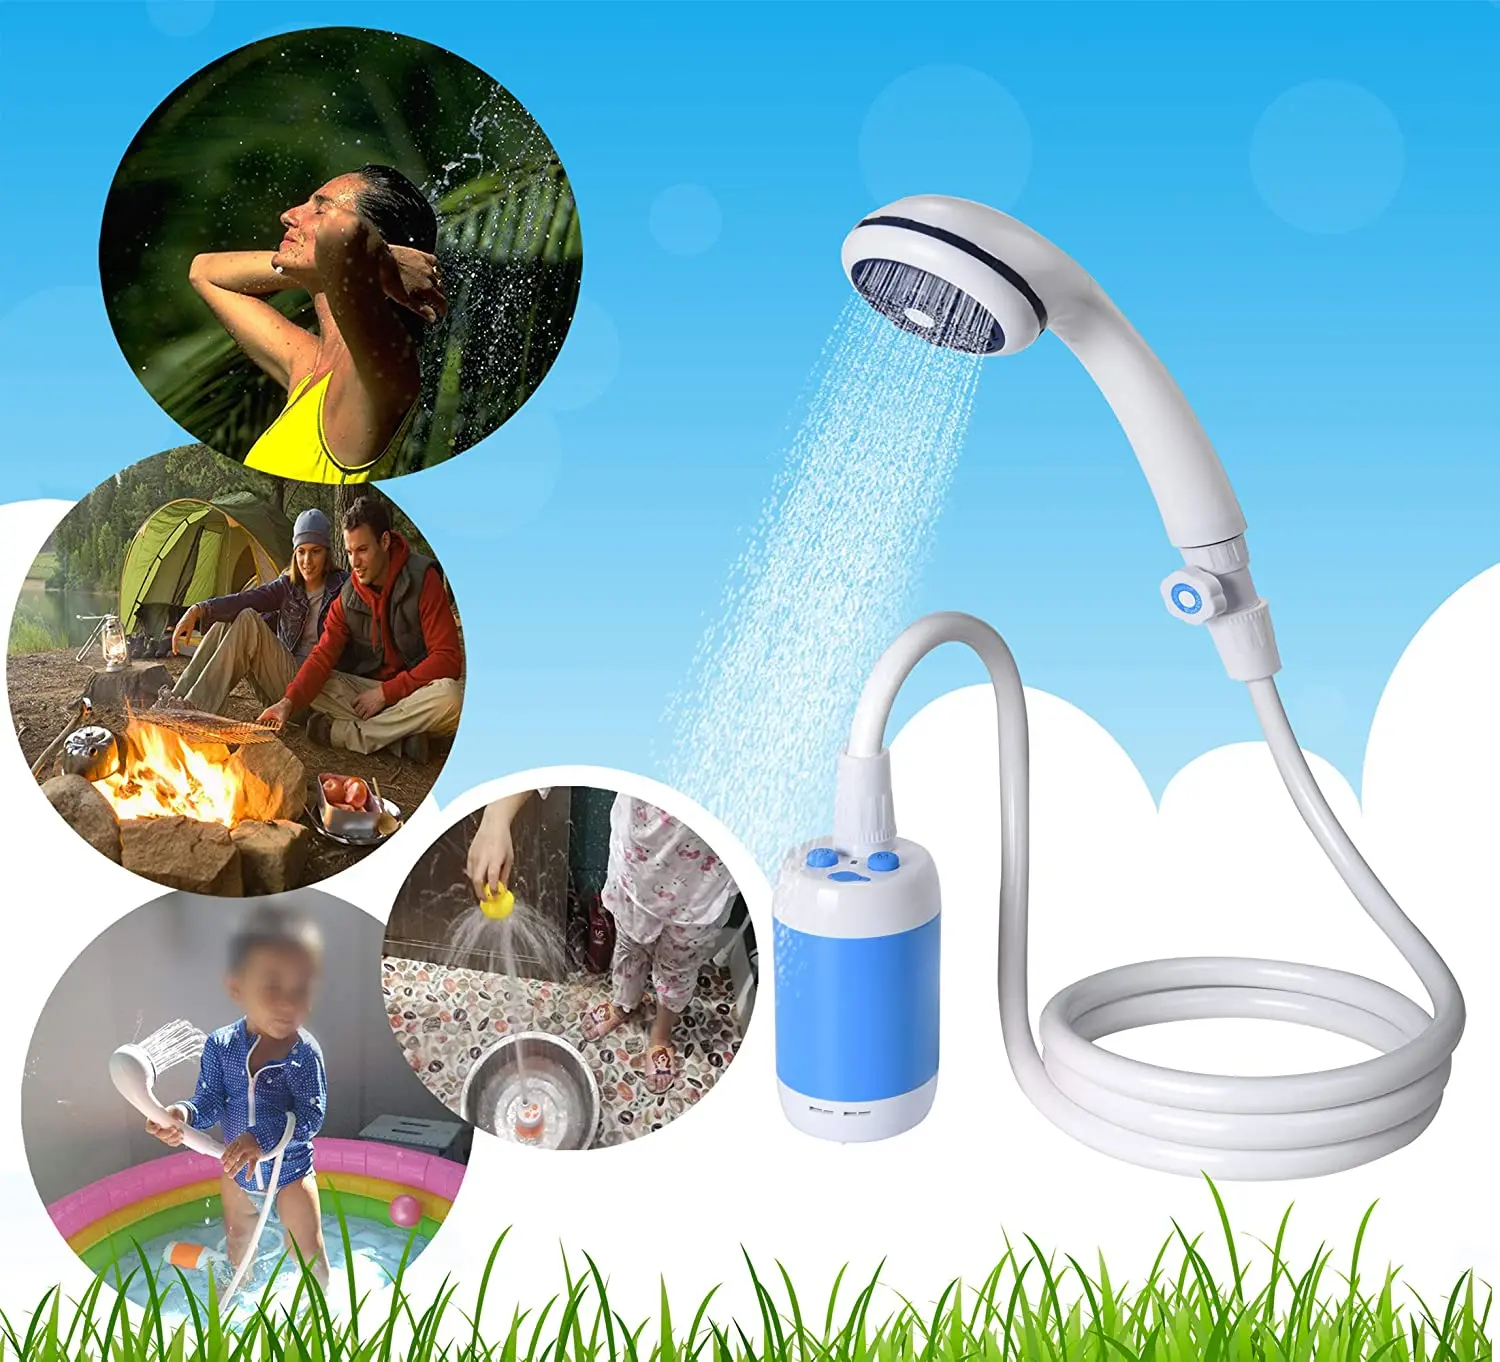 

Portable 4800mah Rechargeable Shower Nozzles Kit With Hook Pump Hose Simple Shower Outdoor Camping Bathing Shower